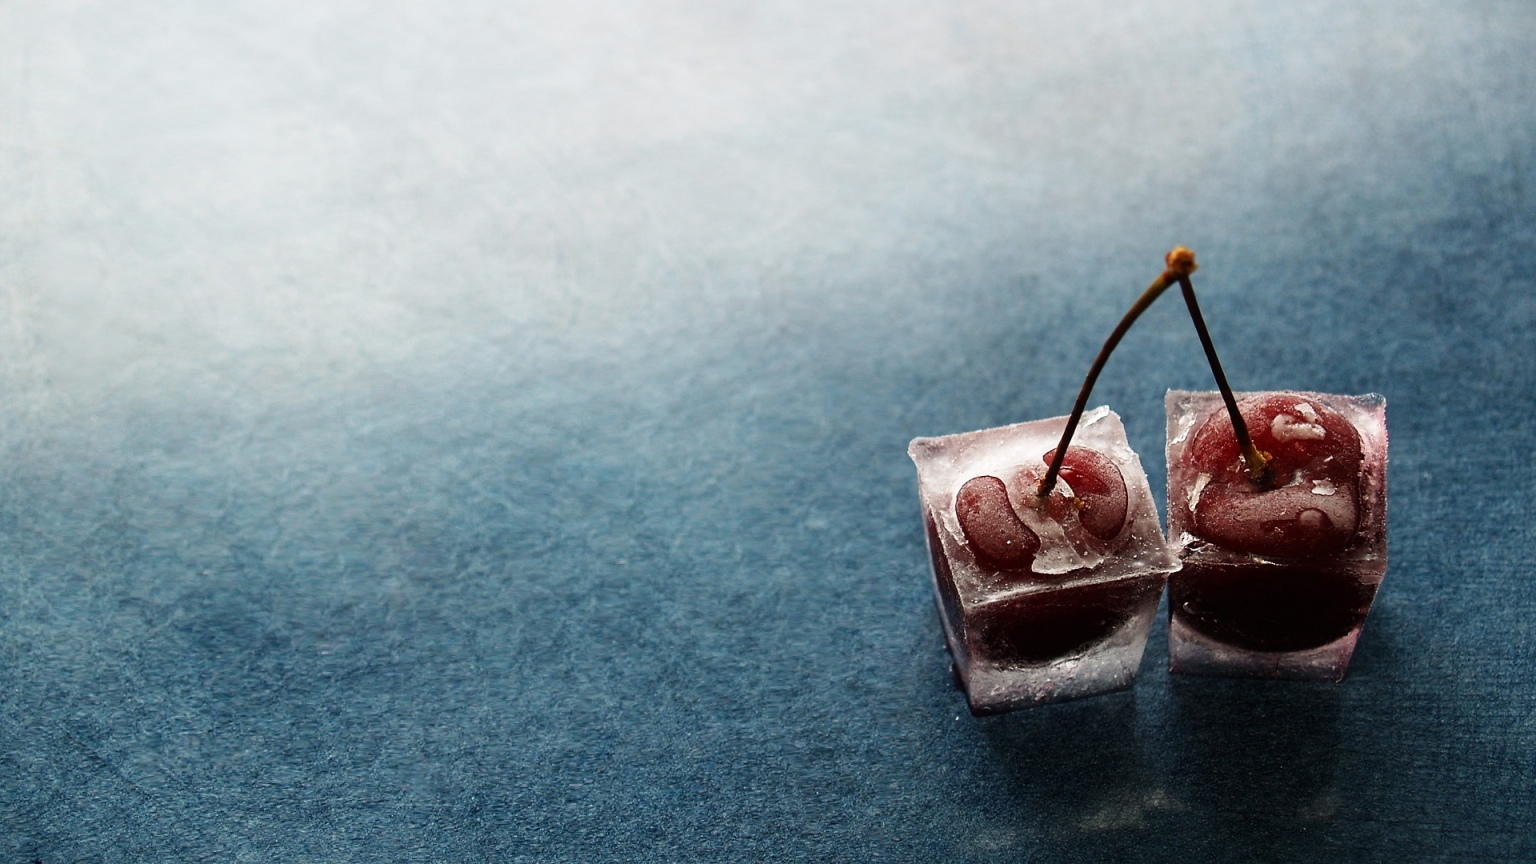 Cherries in Ice for 1536 x 864 HDTV resolution